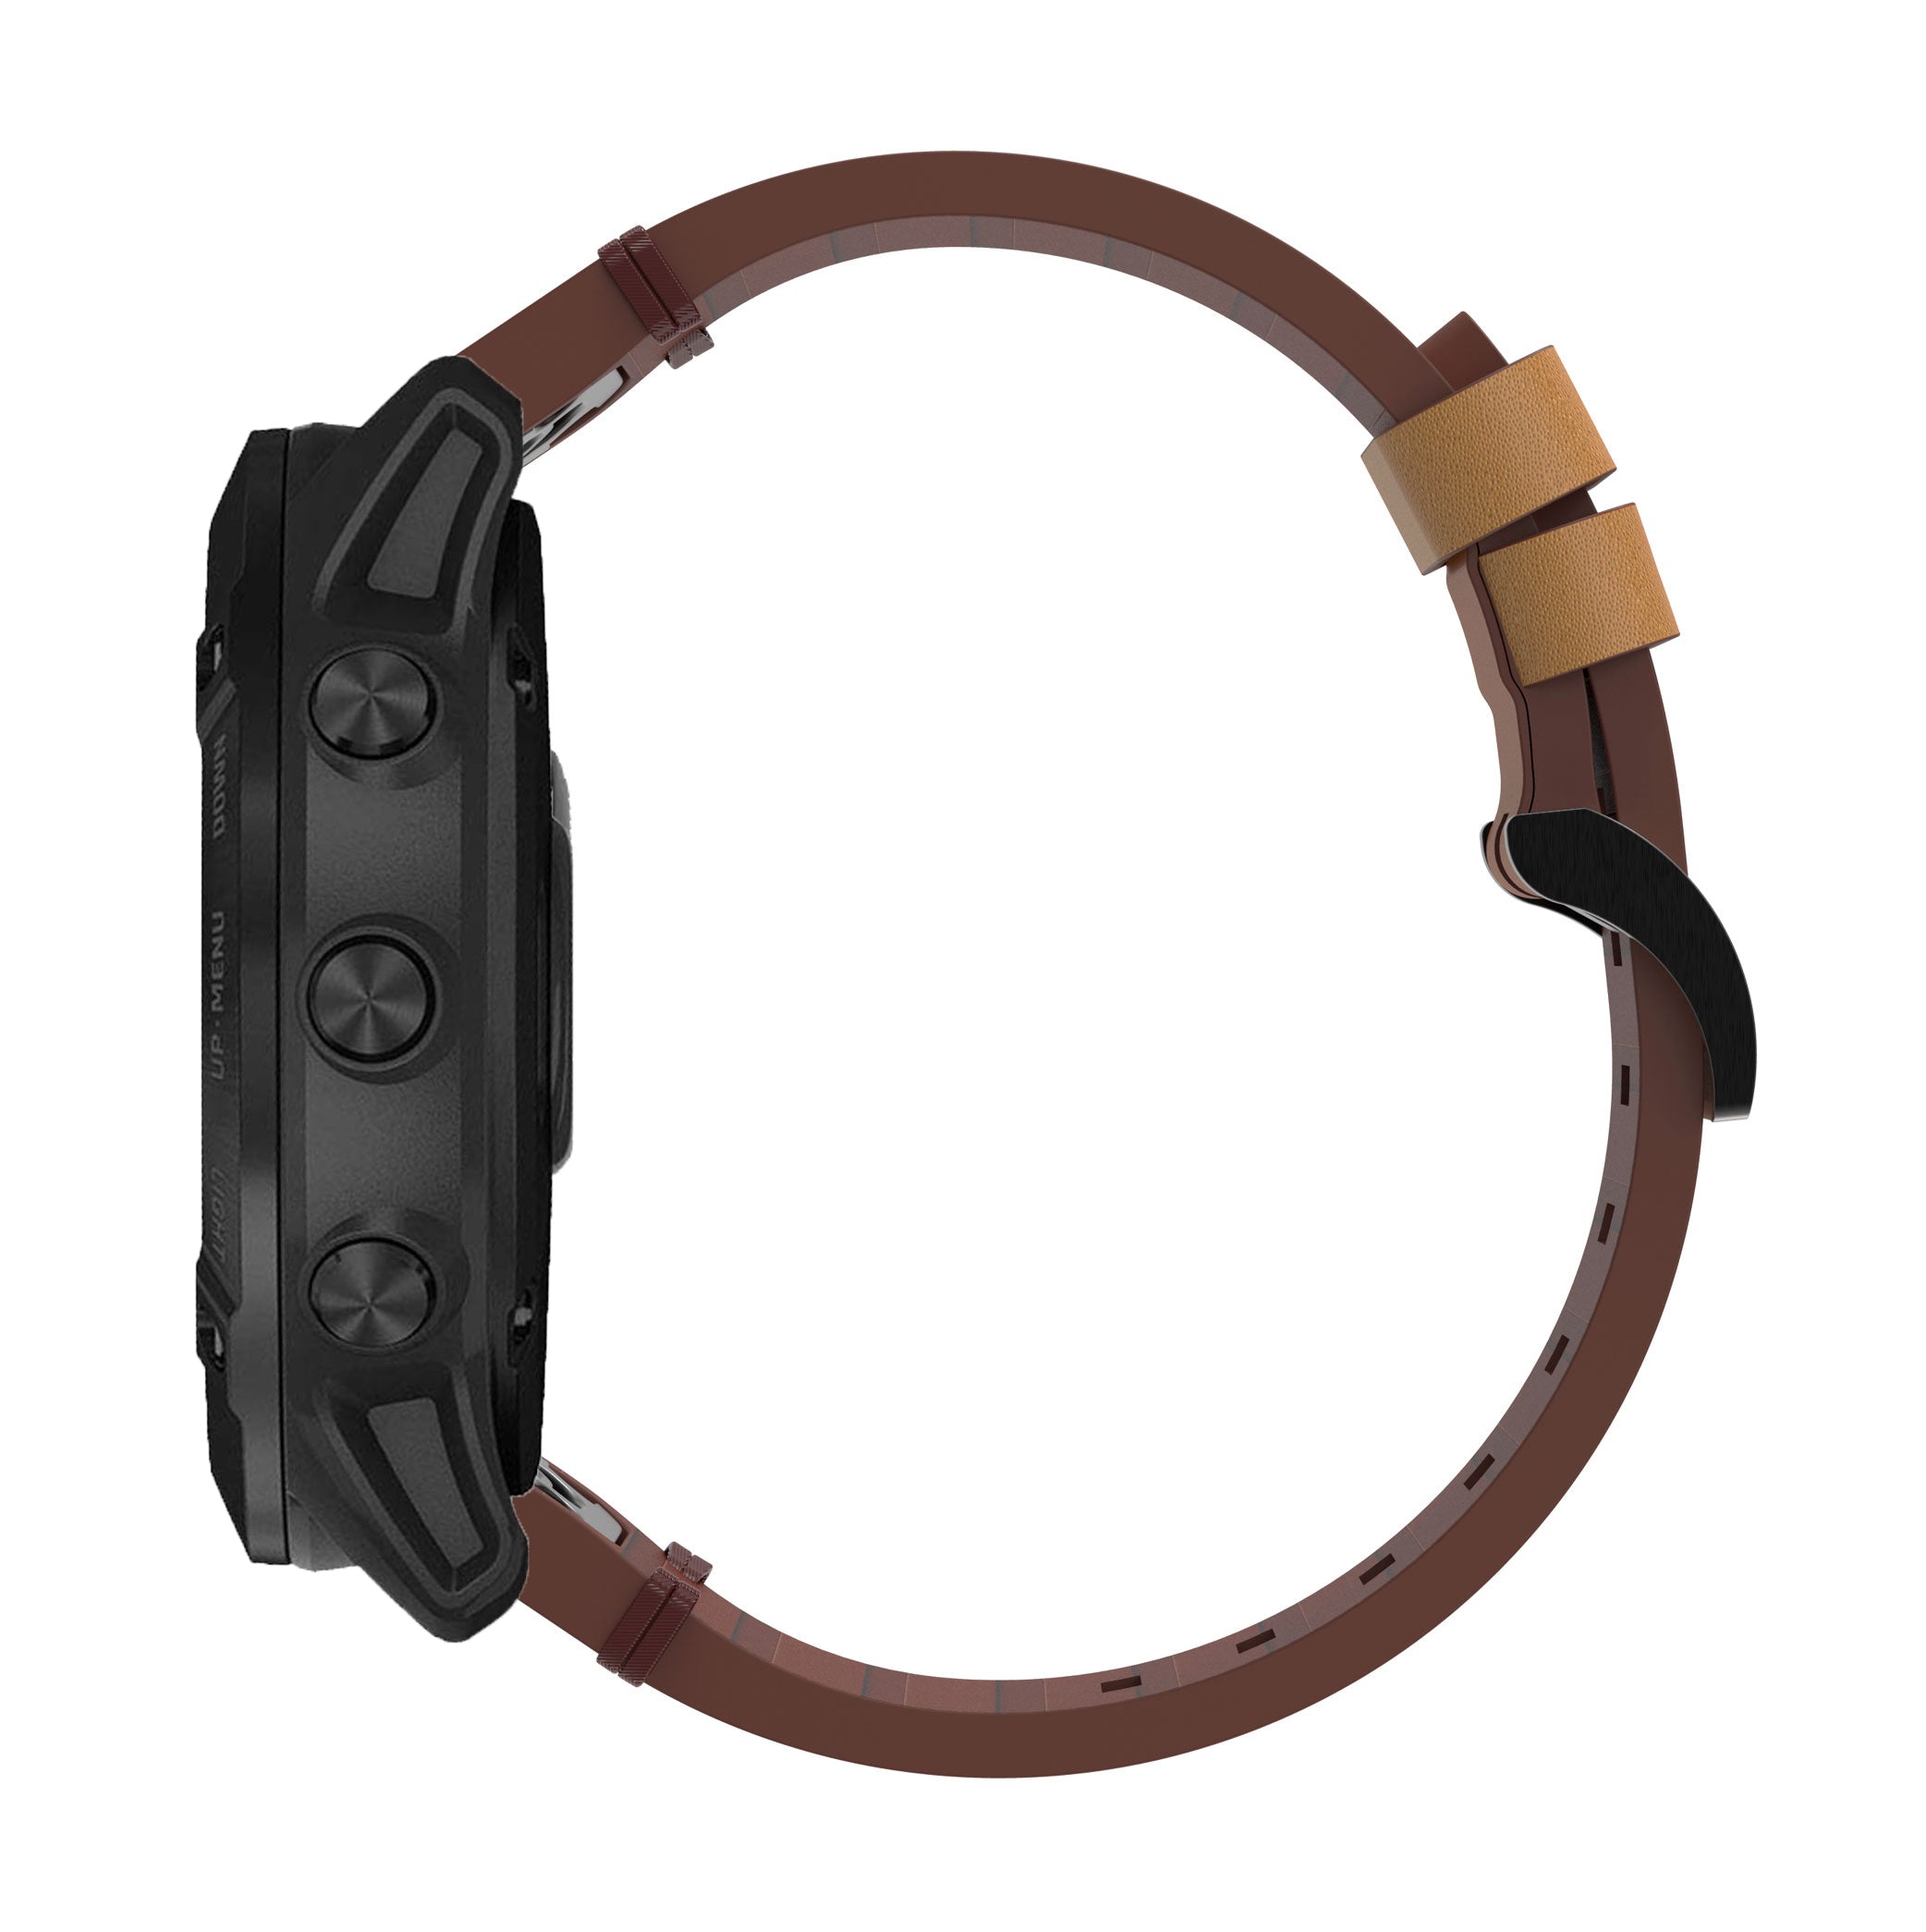 [QuickFit] Leather - Brown 22mm